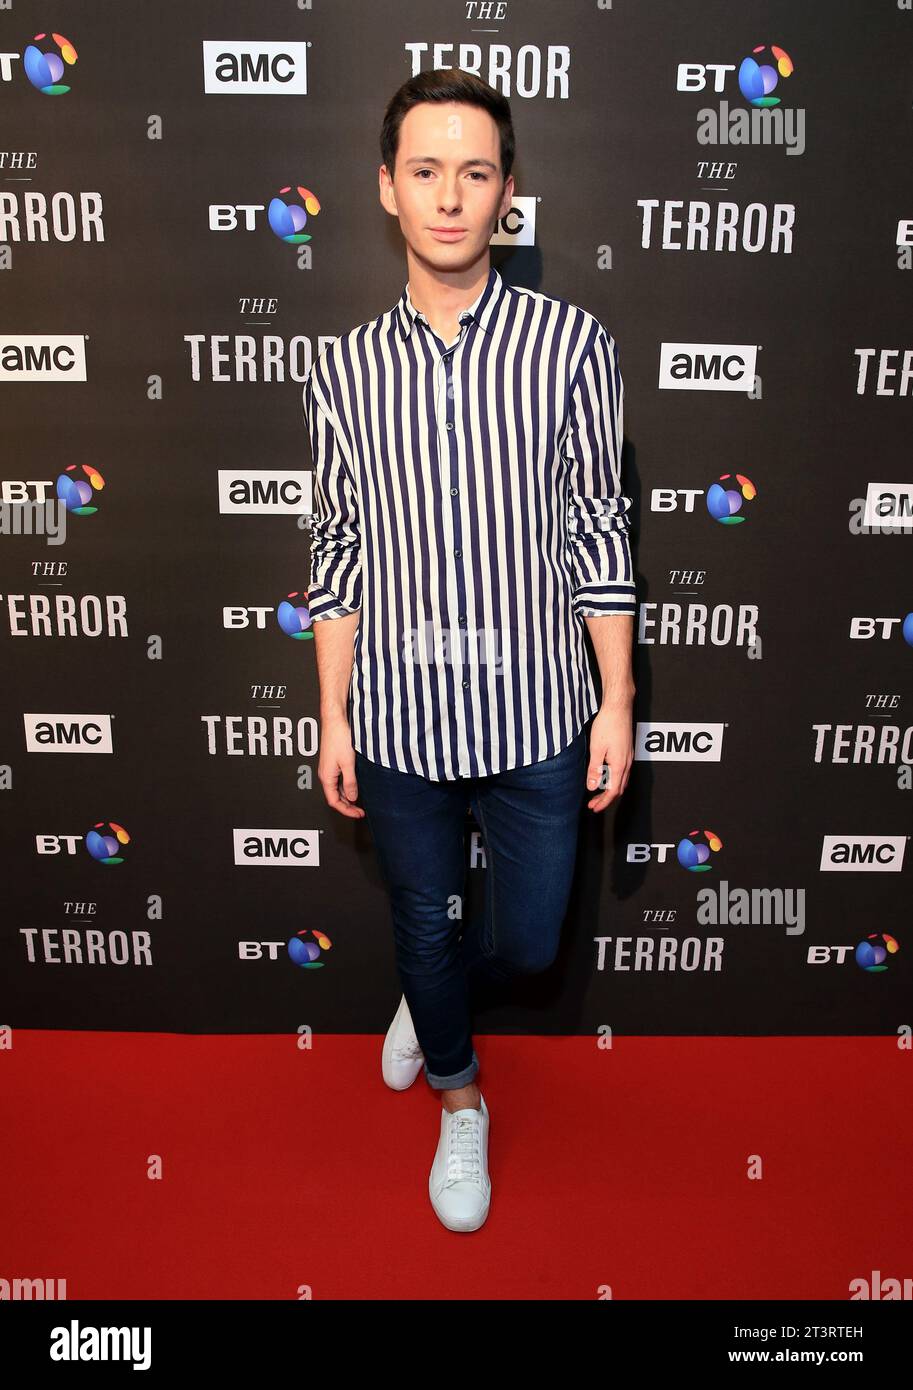 Lorcan London attends 'The Terror' TV show screening at the Royal Geographical Society in London. Stock Photo